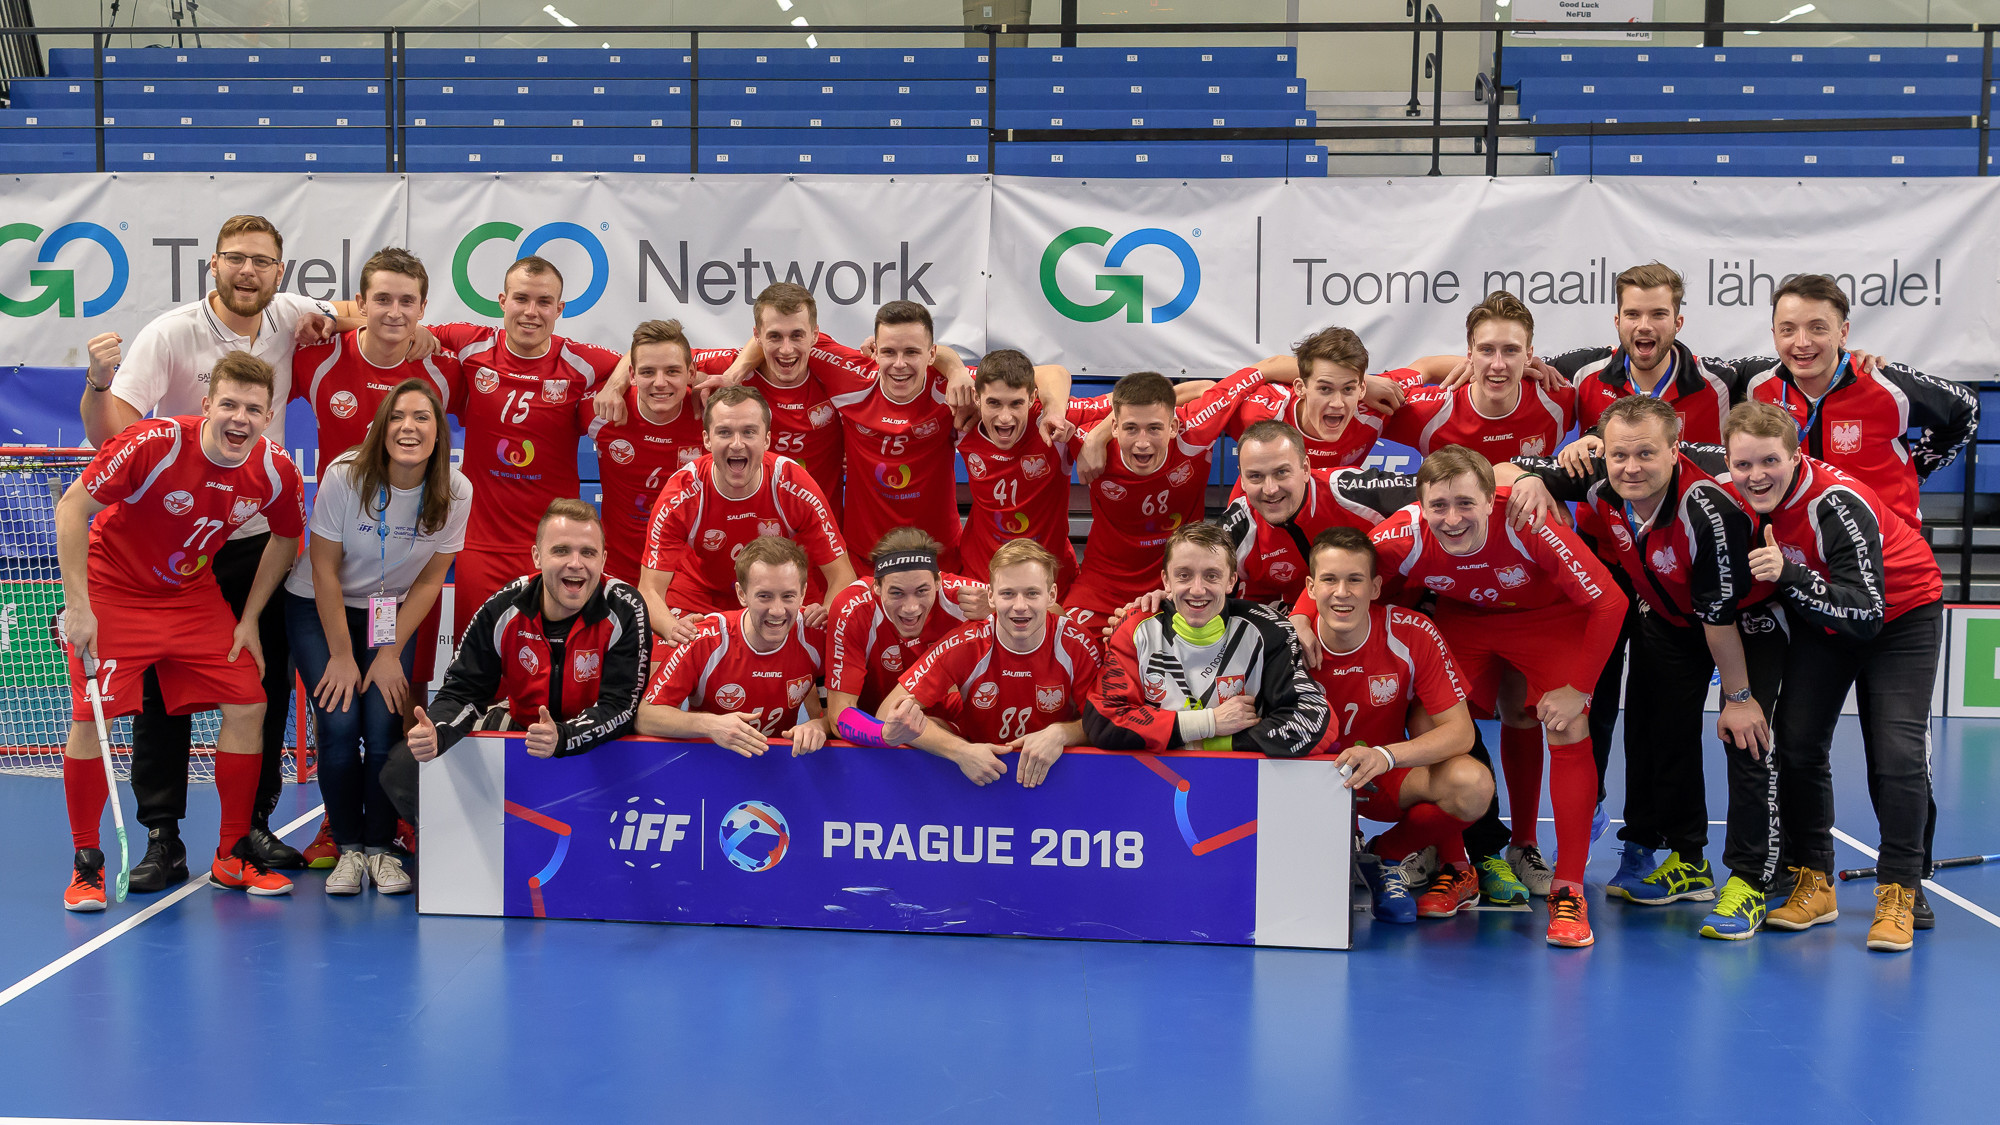 Poland secure World Championship place on final day of IFF European Floorball qualifiers